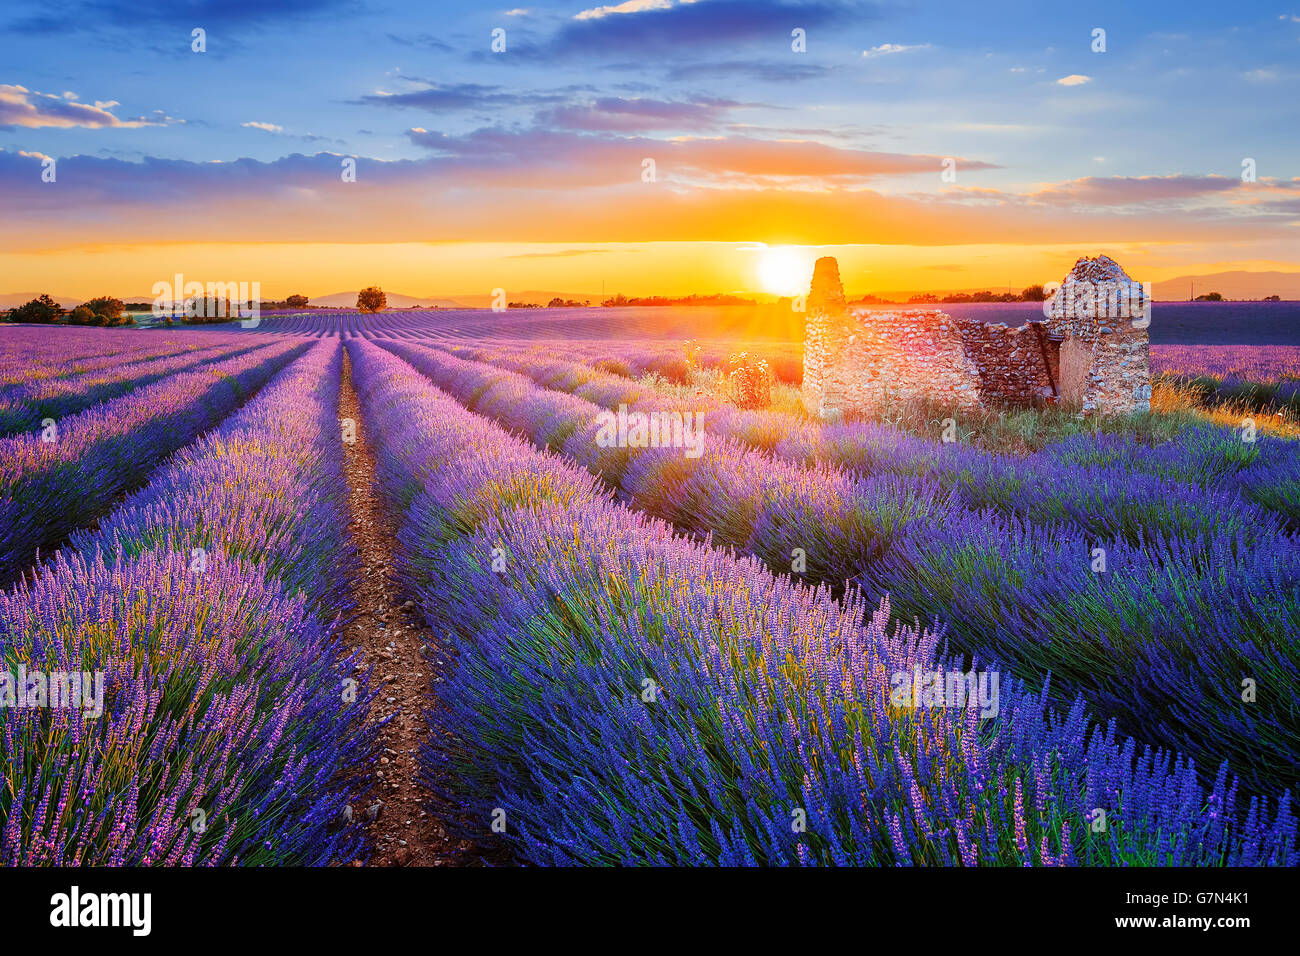 Sun is setting over a beautiful purple lavender filed in Valensole. Provence, France Stock Photo